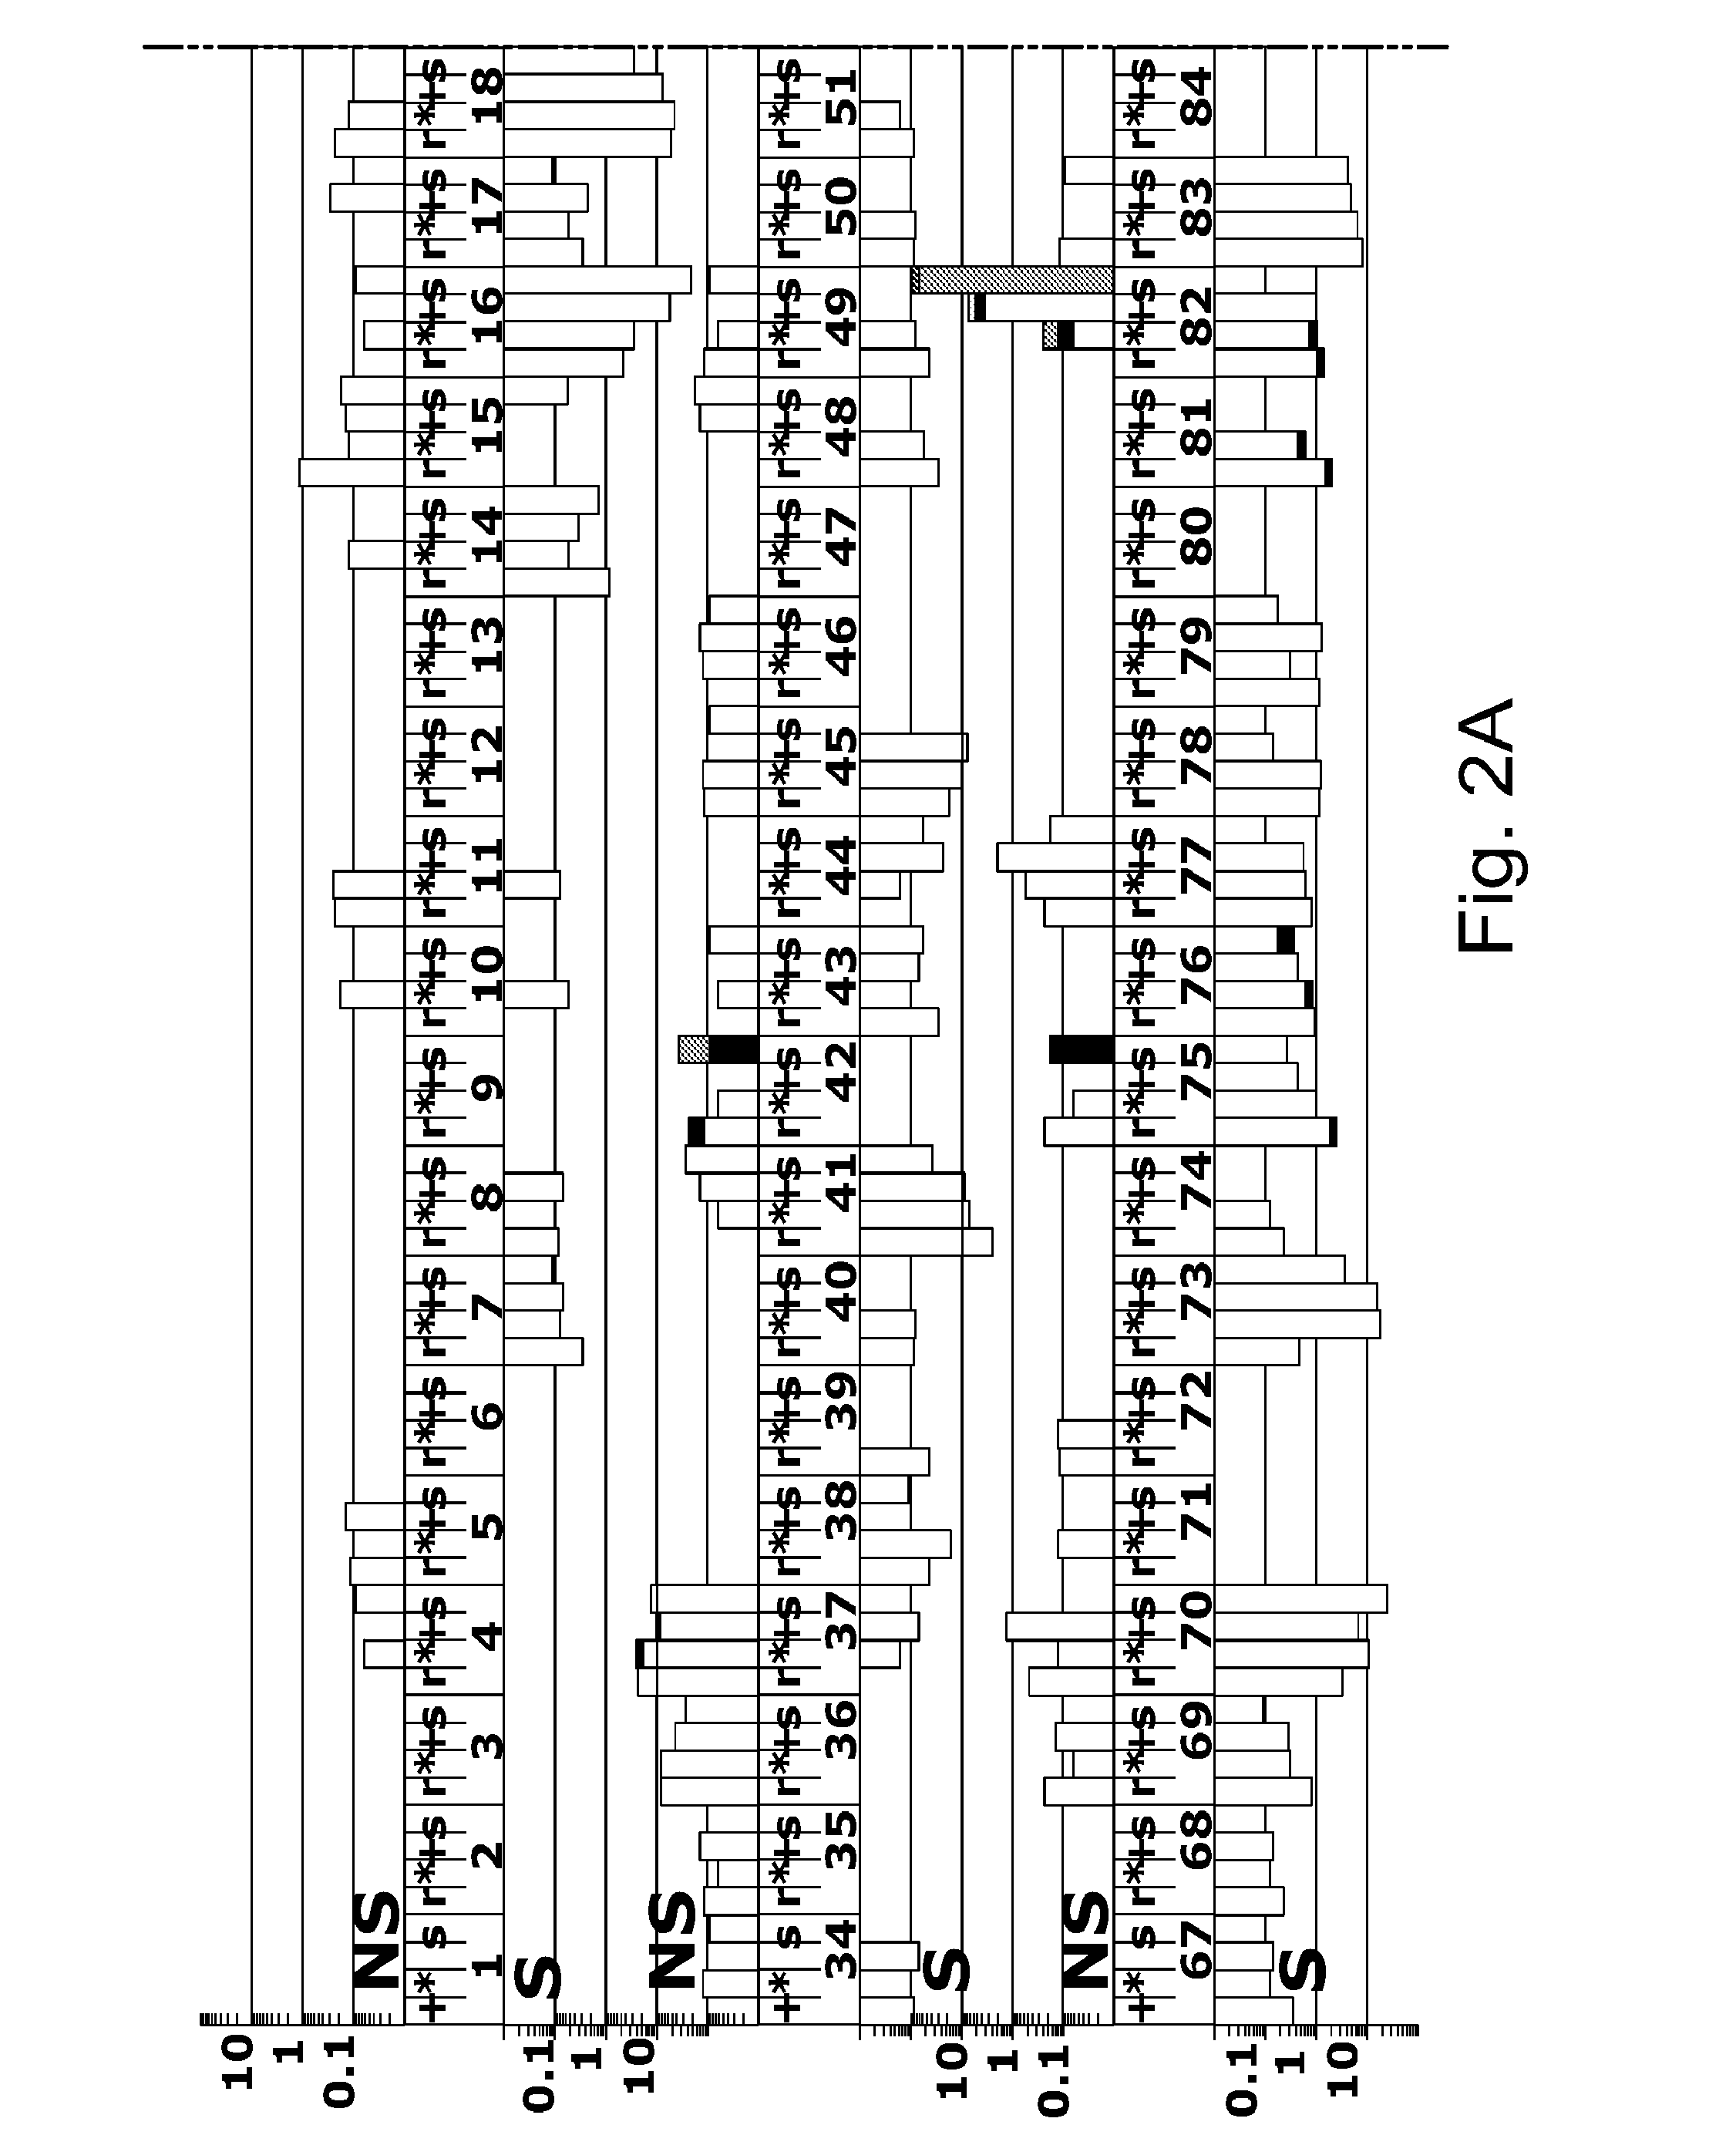 Methods and uses for molecular tags